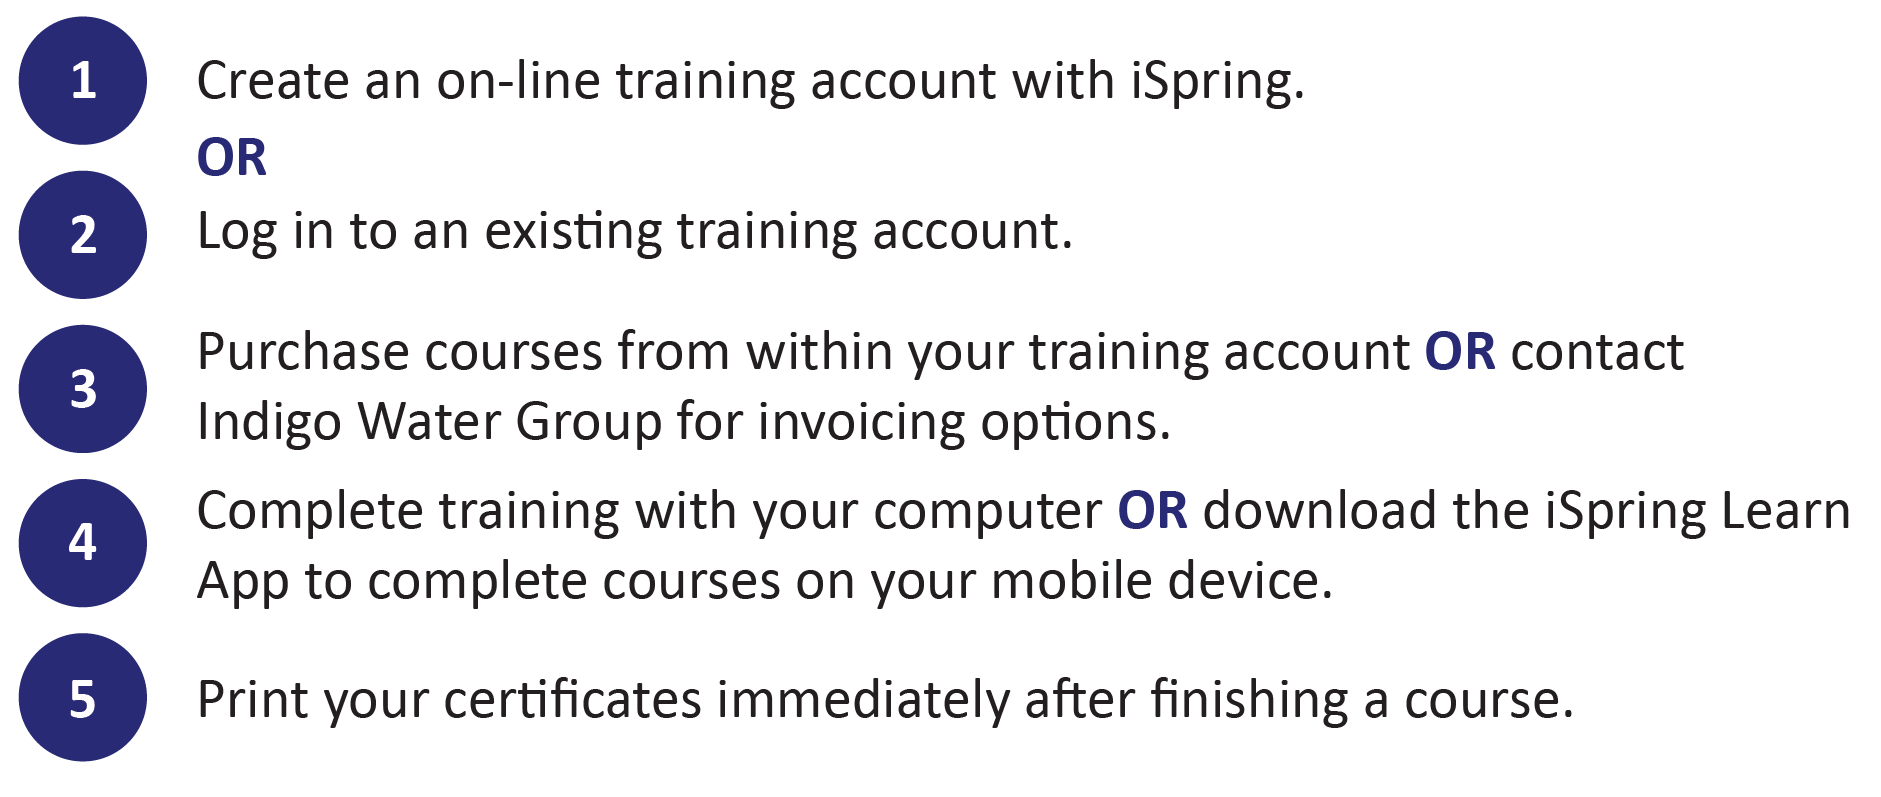 Directions for creating iSpring learning account.